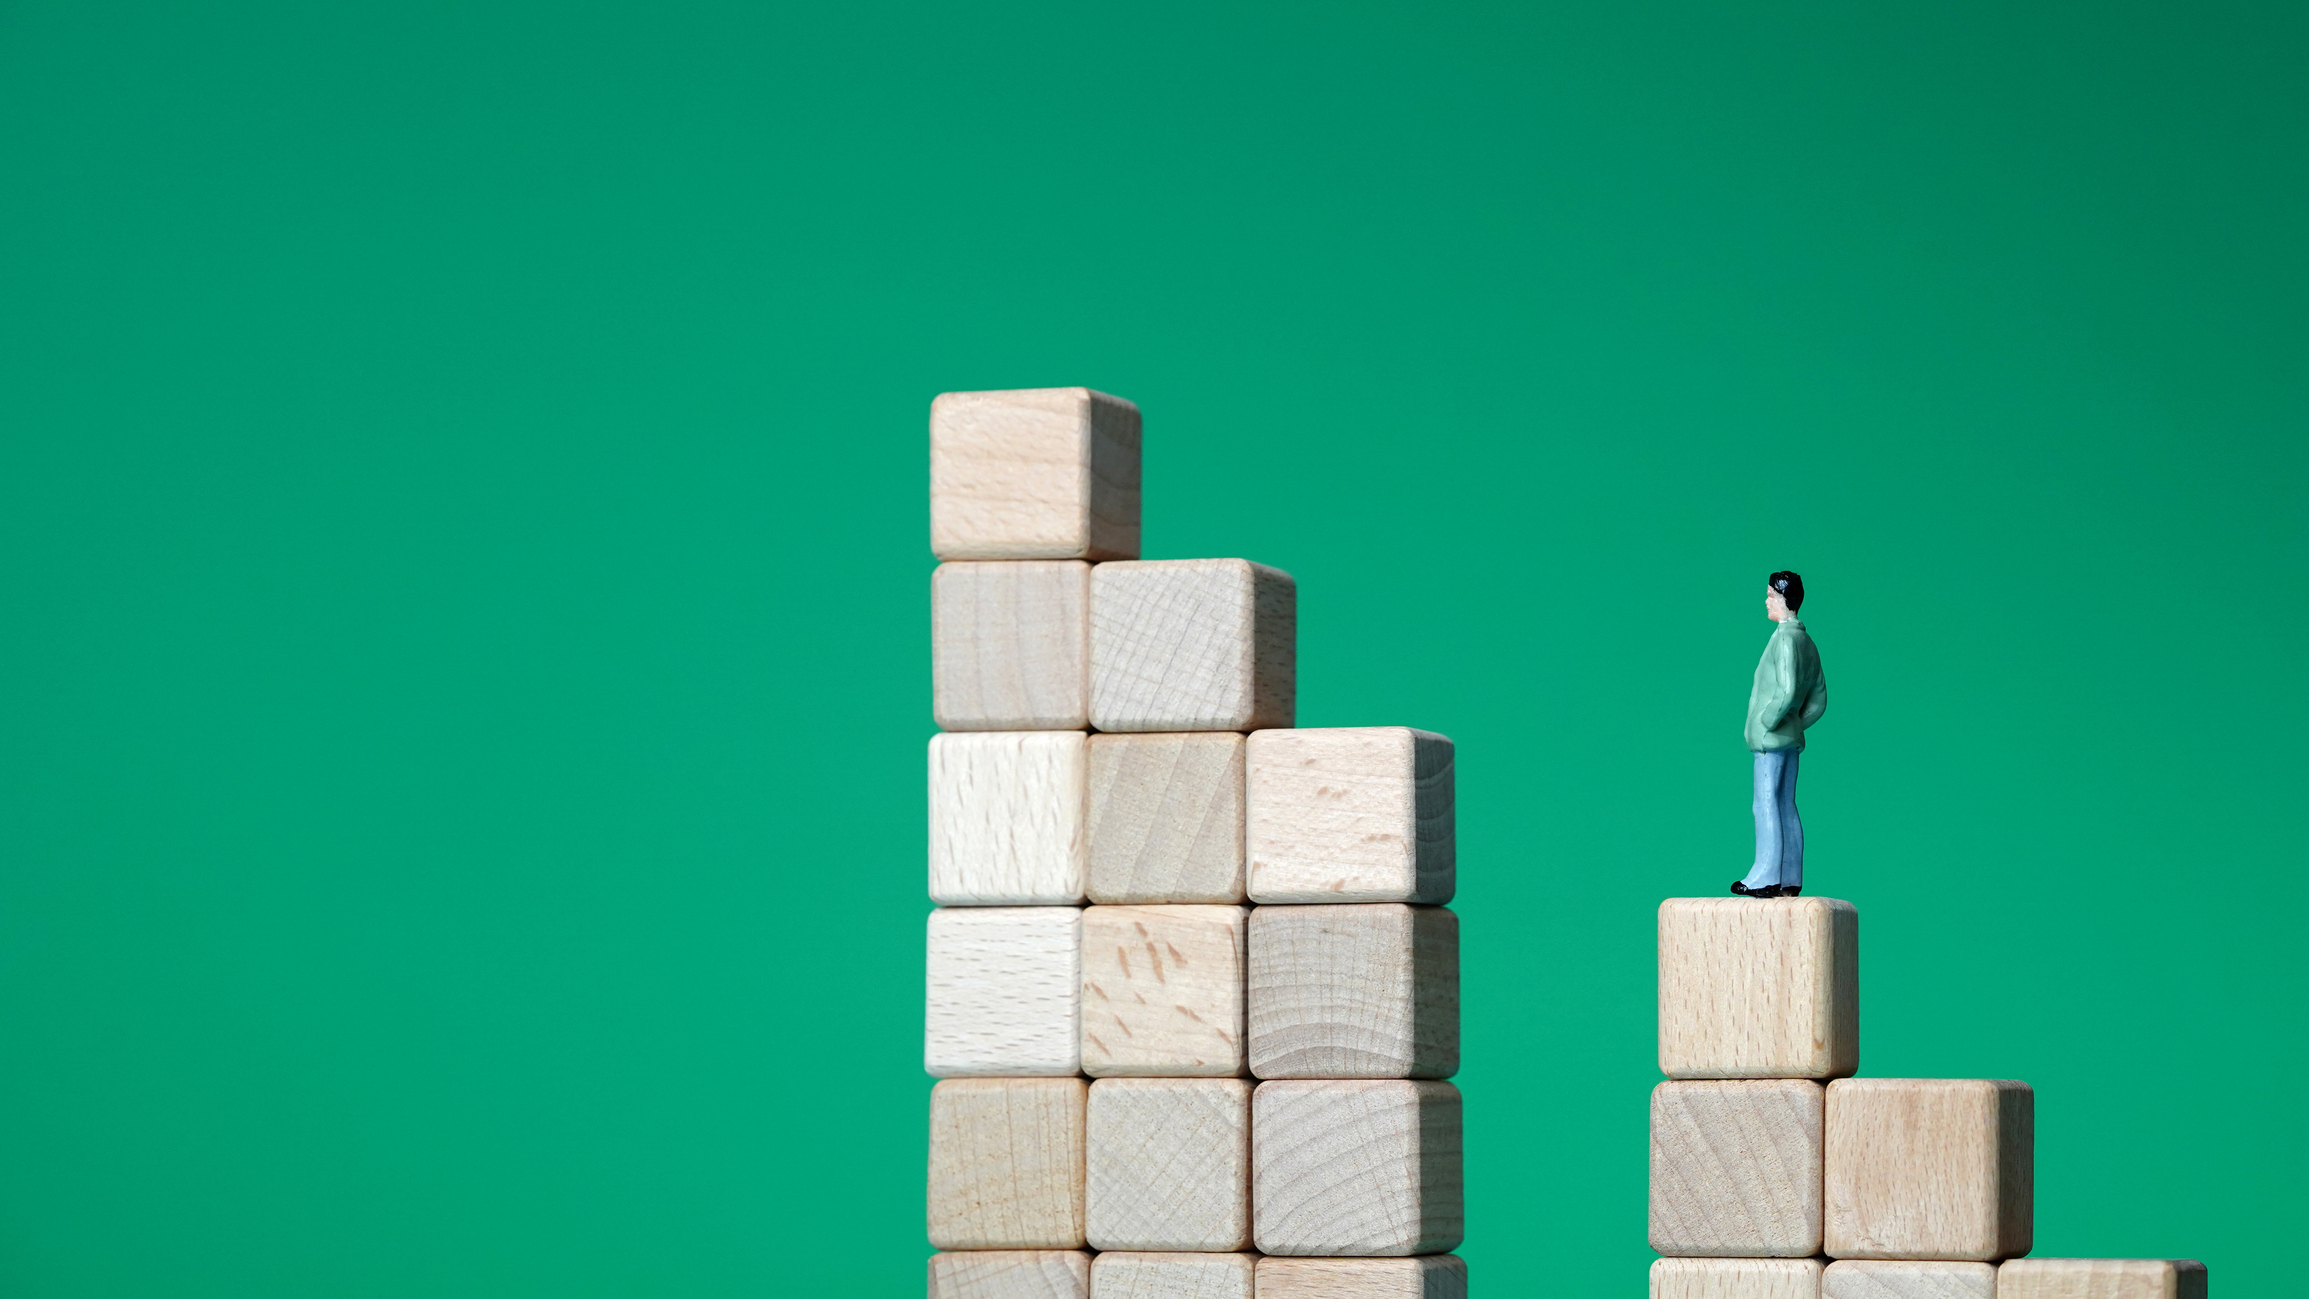 A photo of a small toy figure of a man standing on a staircase of blocks split by a large gap